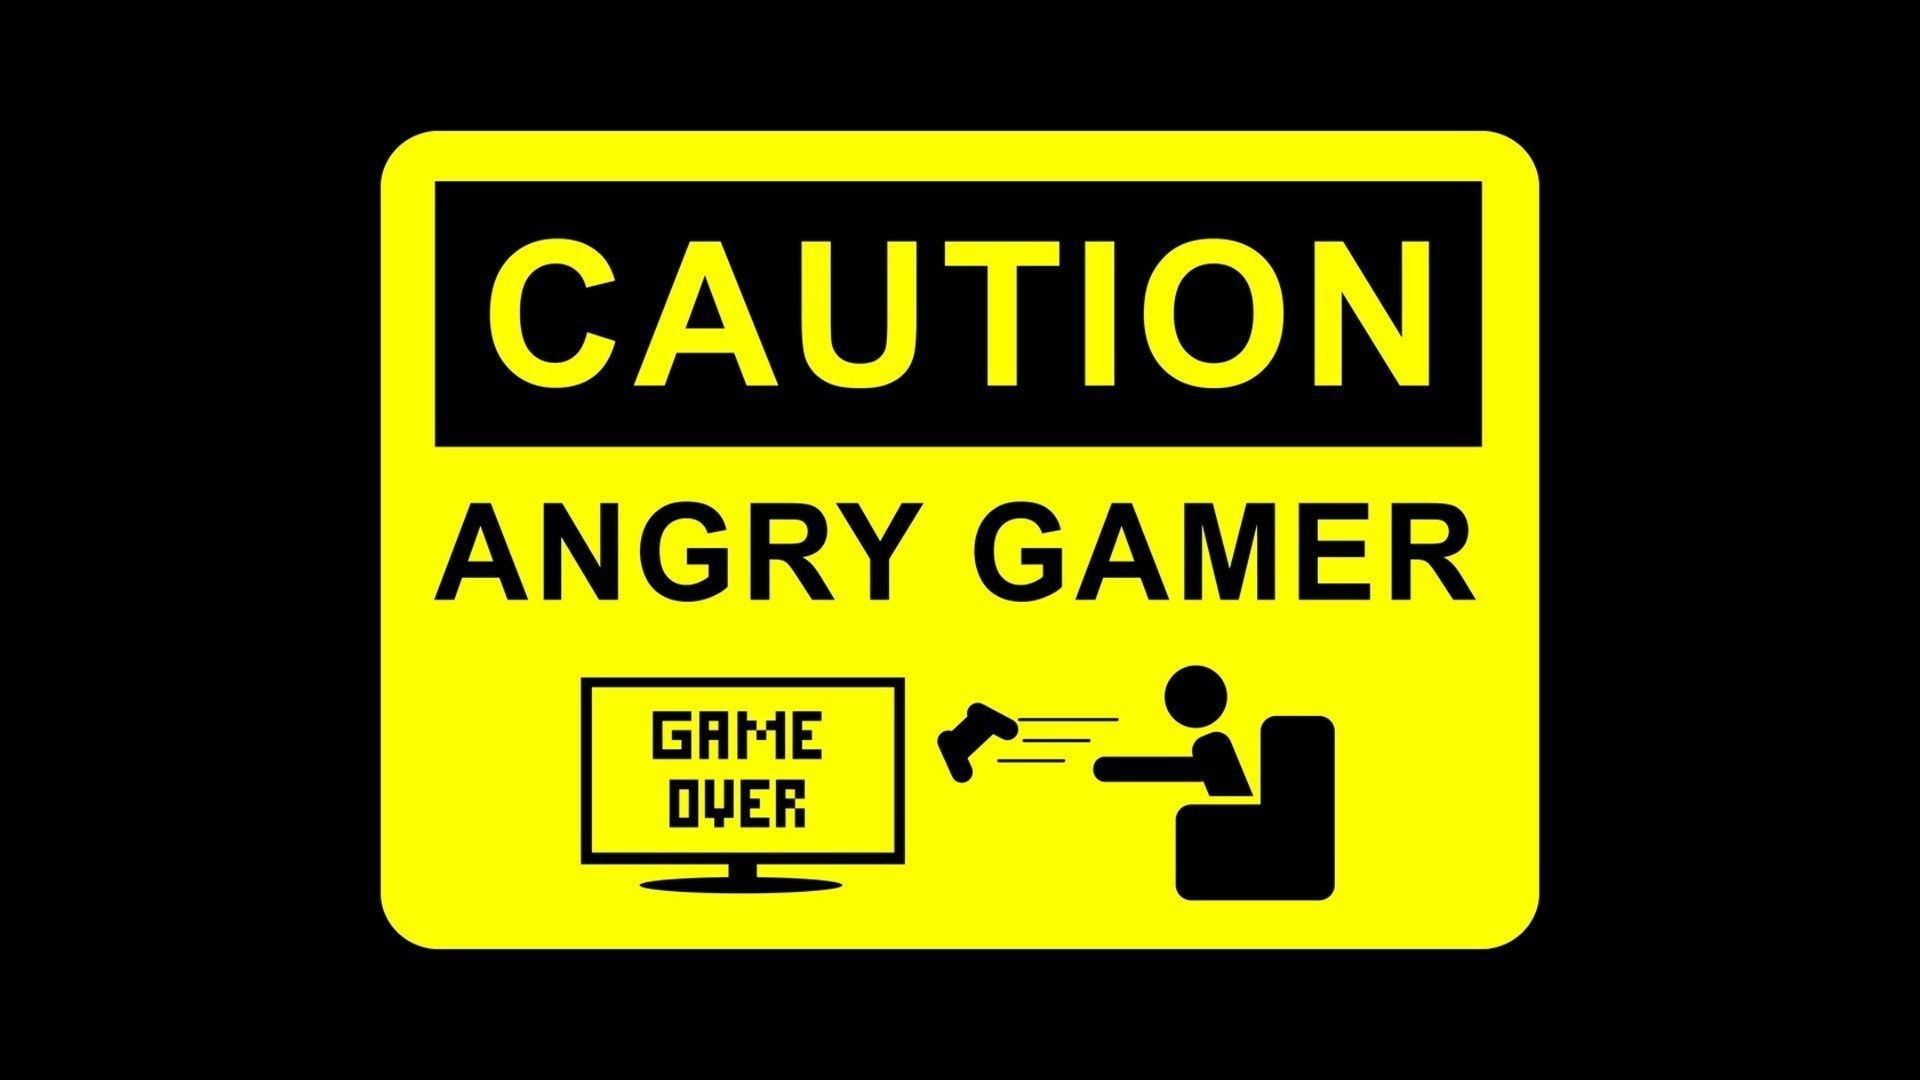 gamers video games game over sign